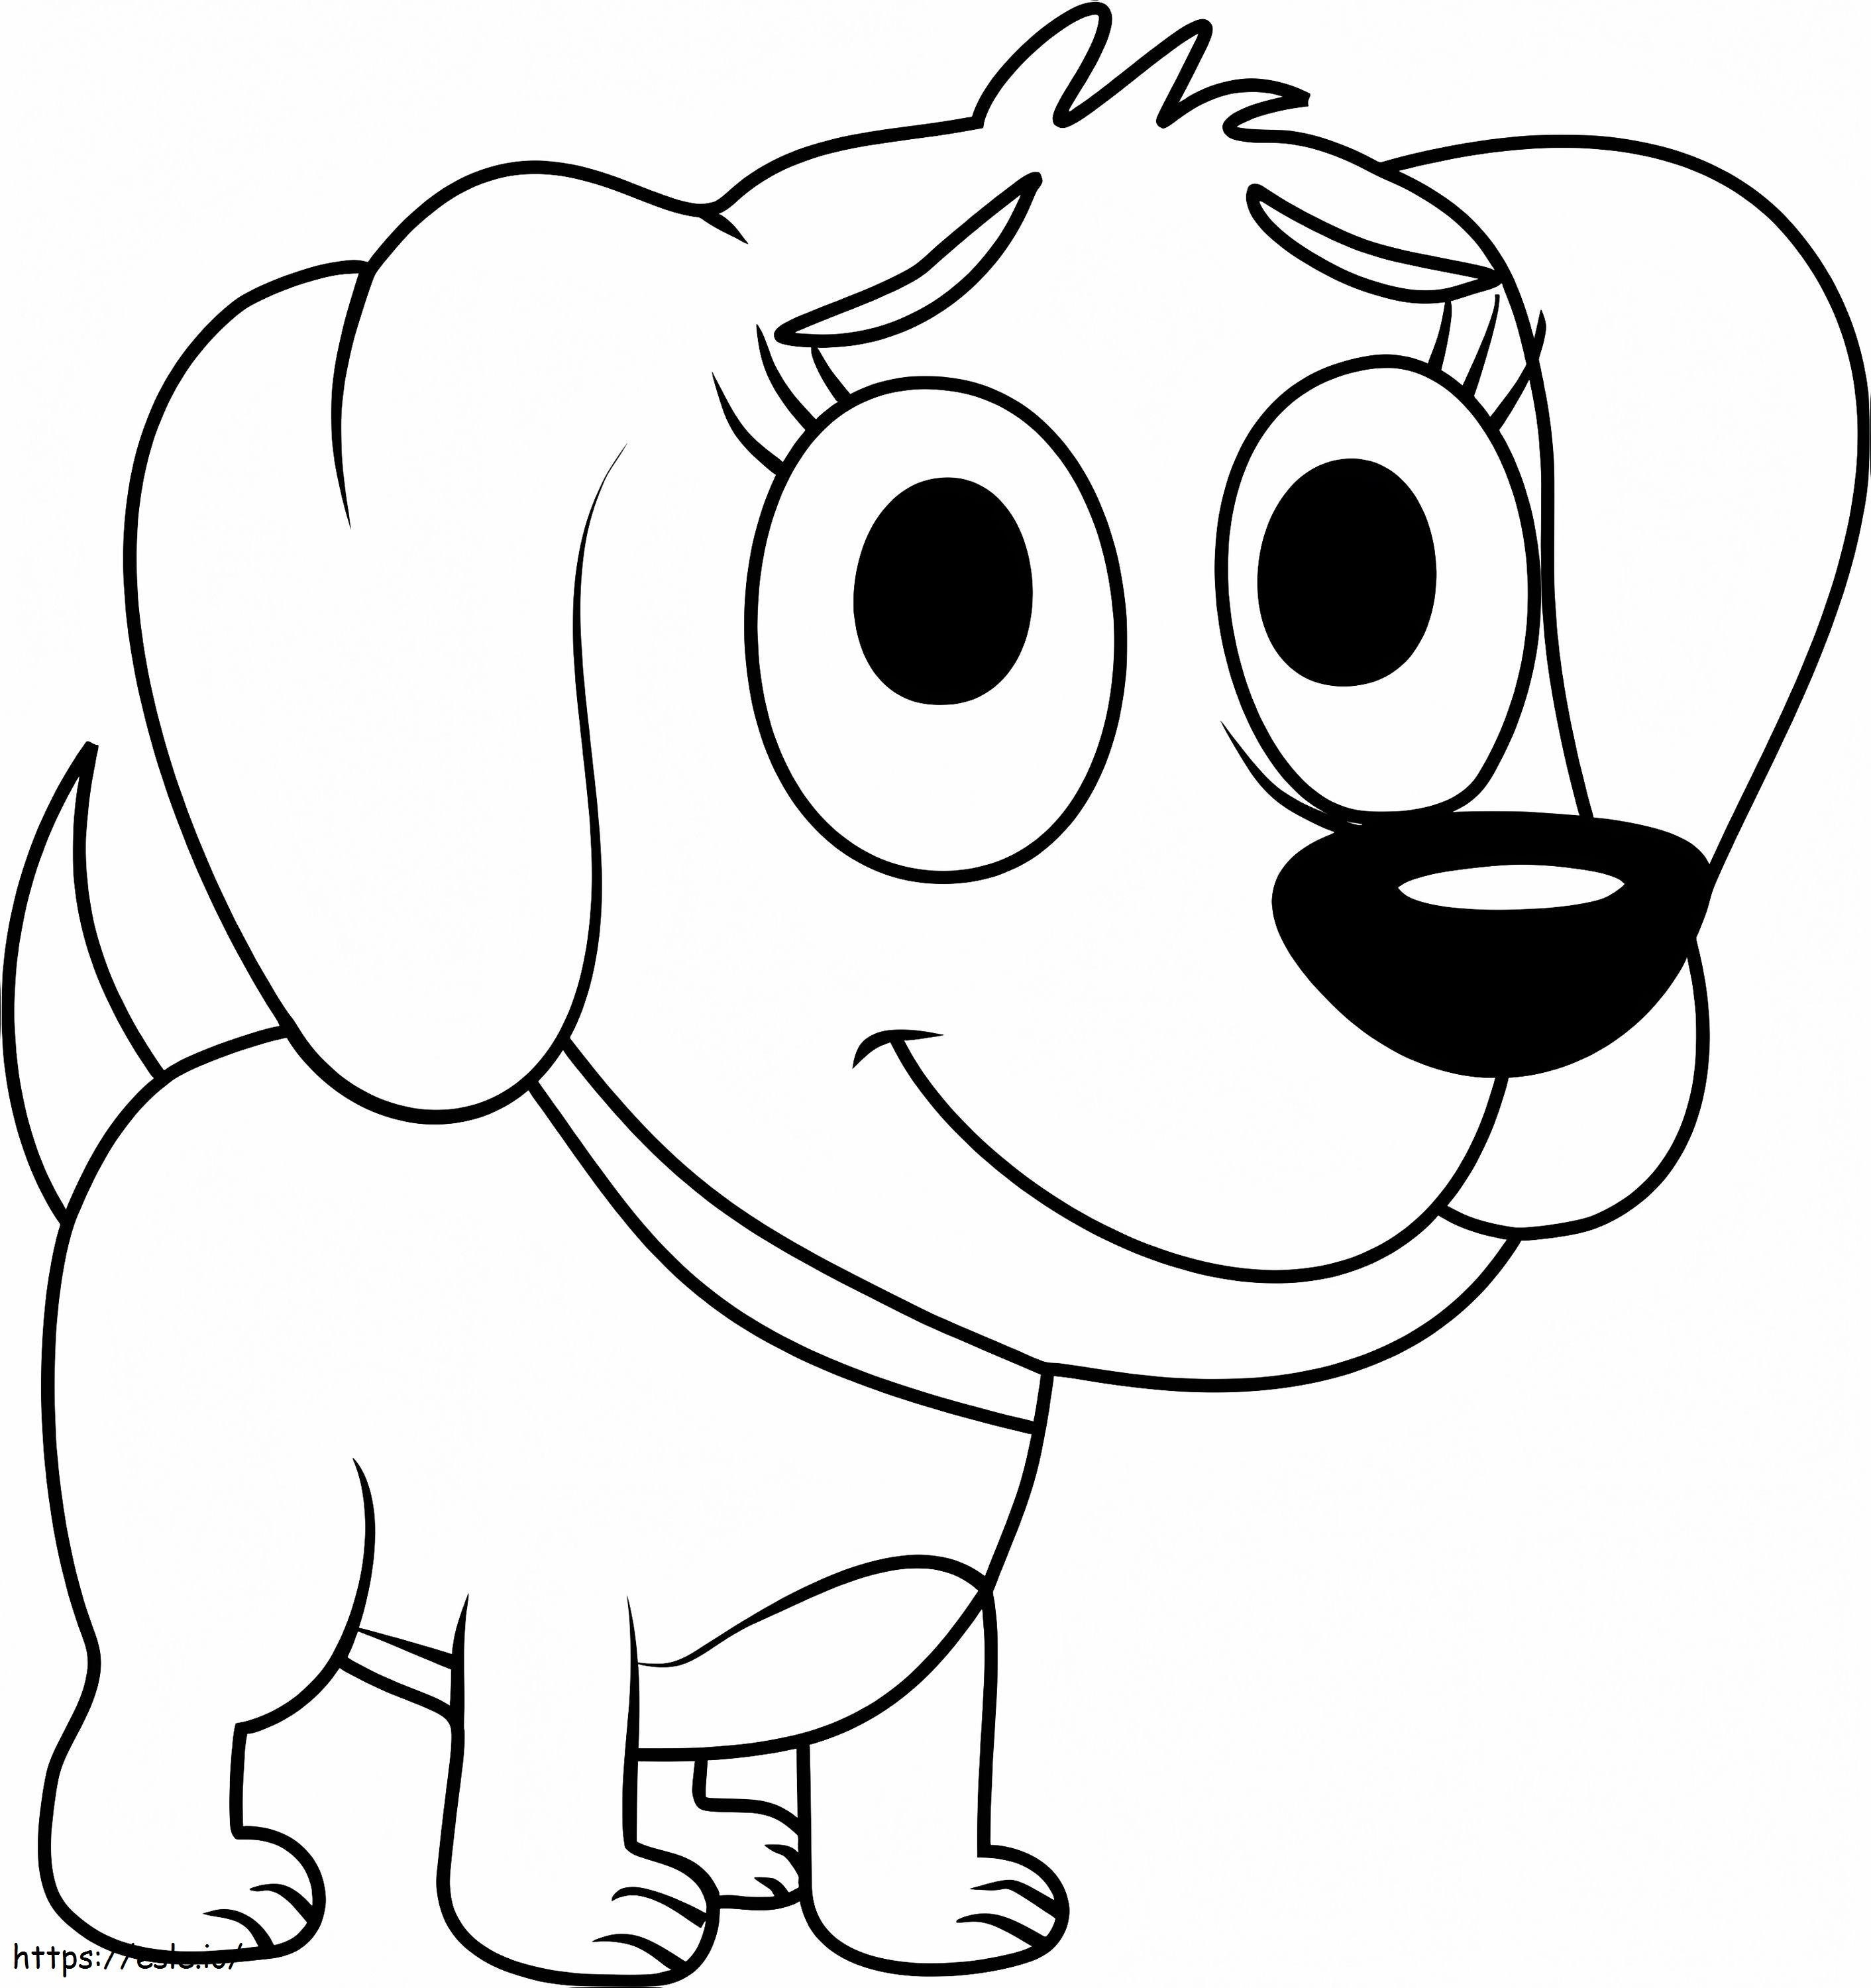 Poopsie From Pound Puppies coloring page